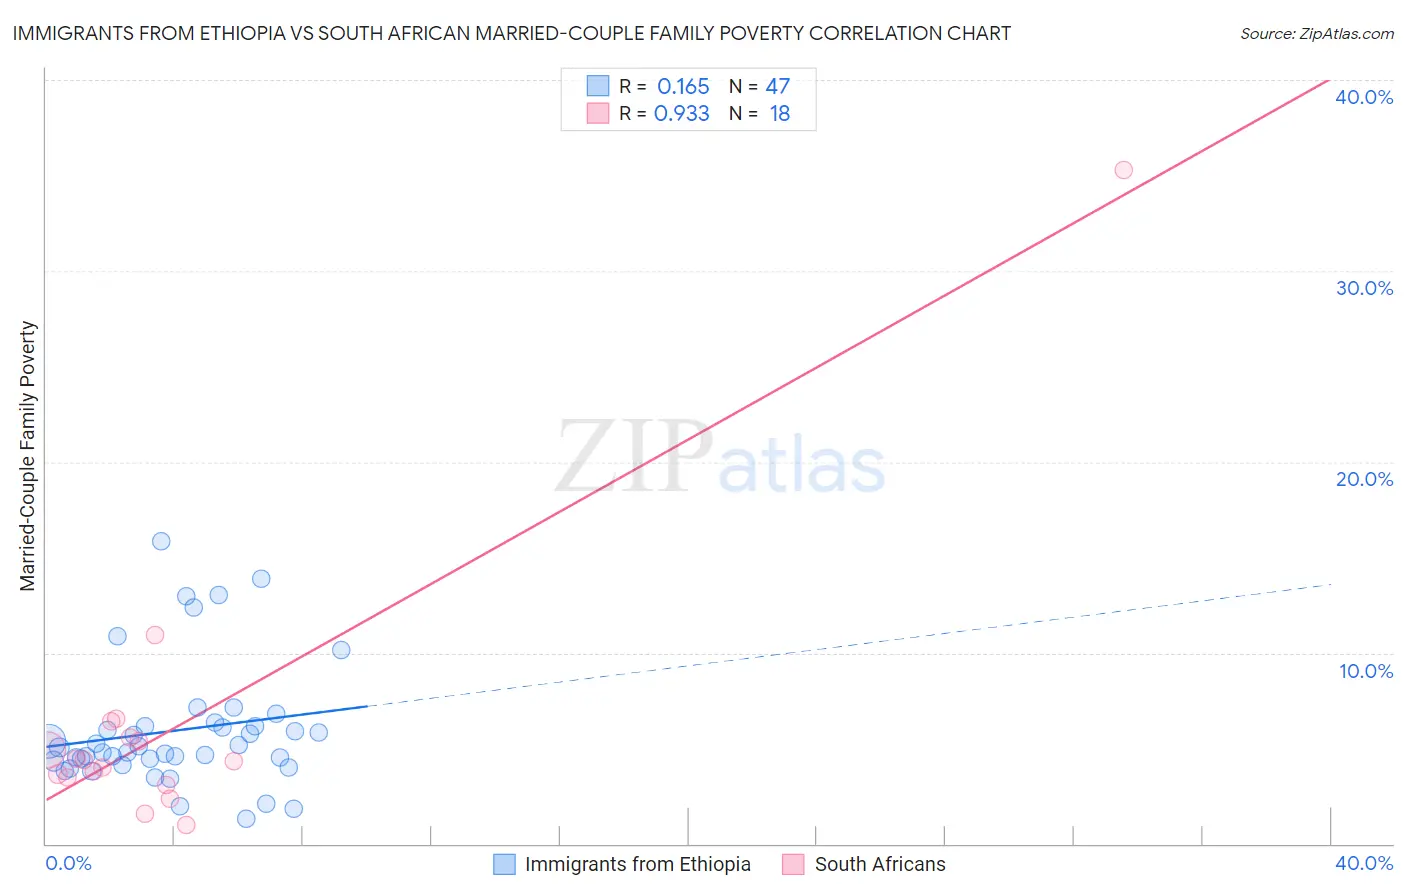 Immigrants from Ethiopia vs South African Married-Couple Family Poverty